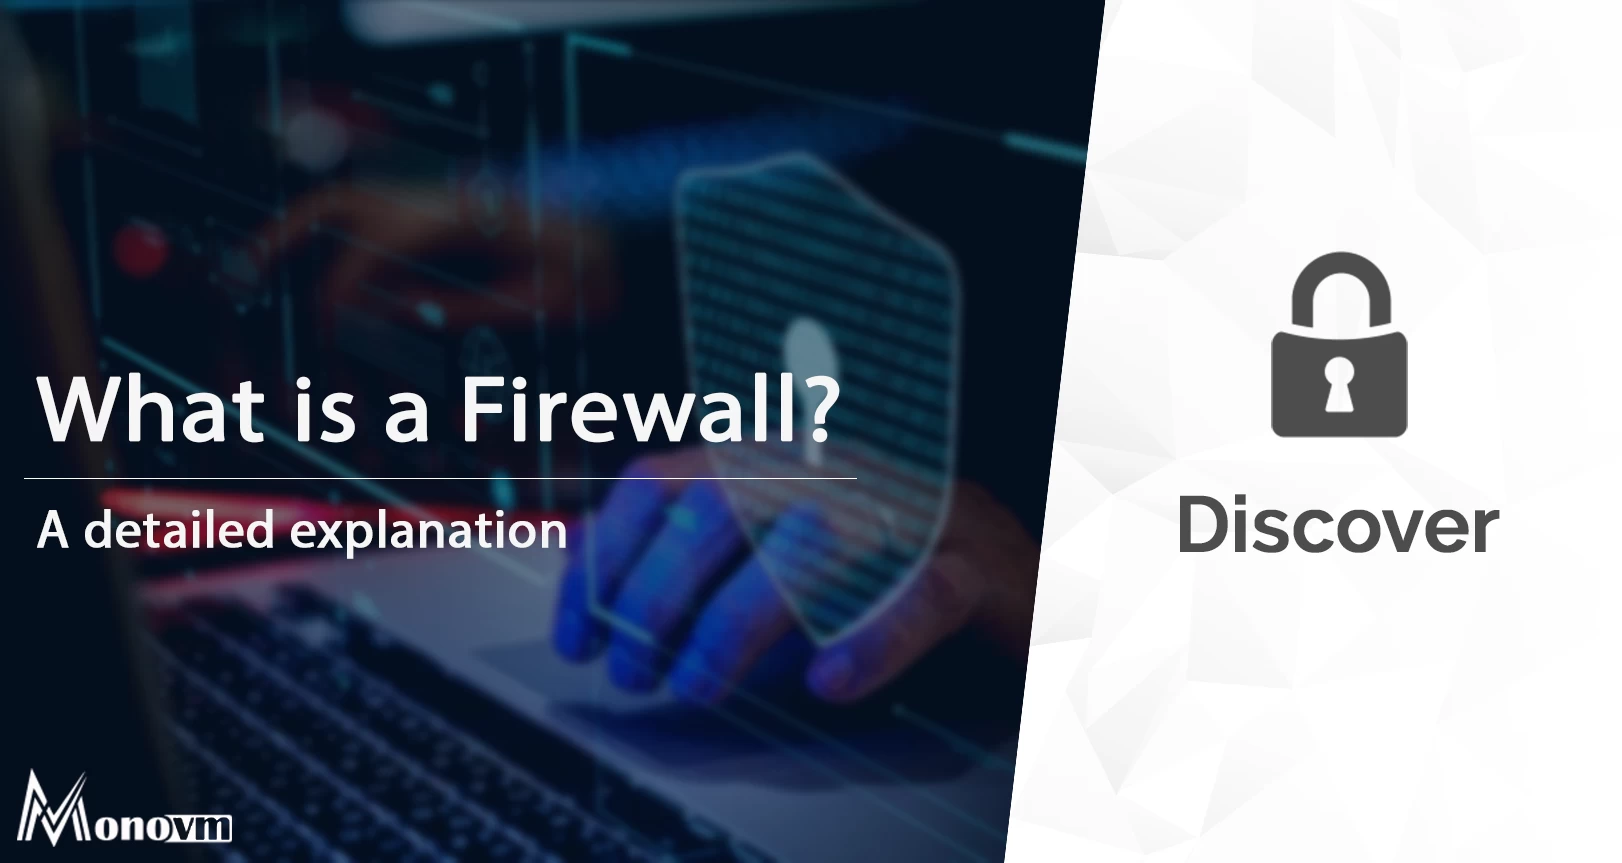 What is Firewall in a Computer network